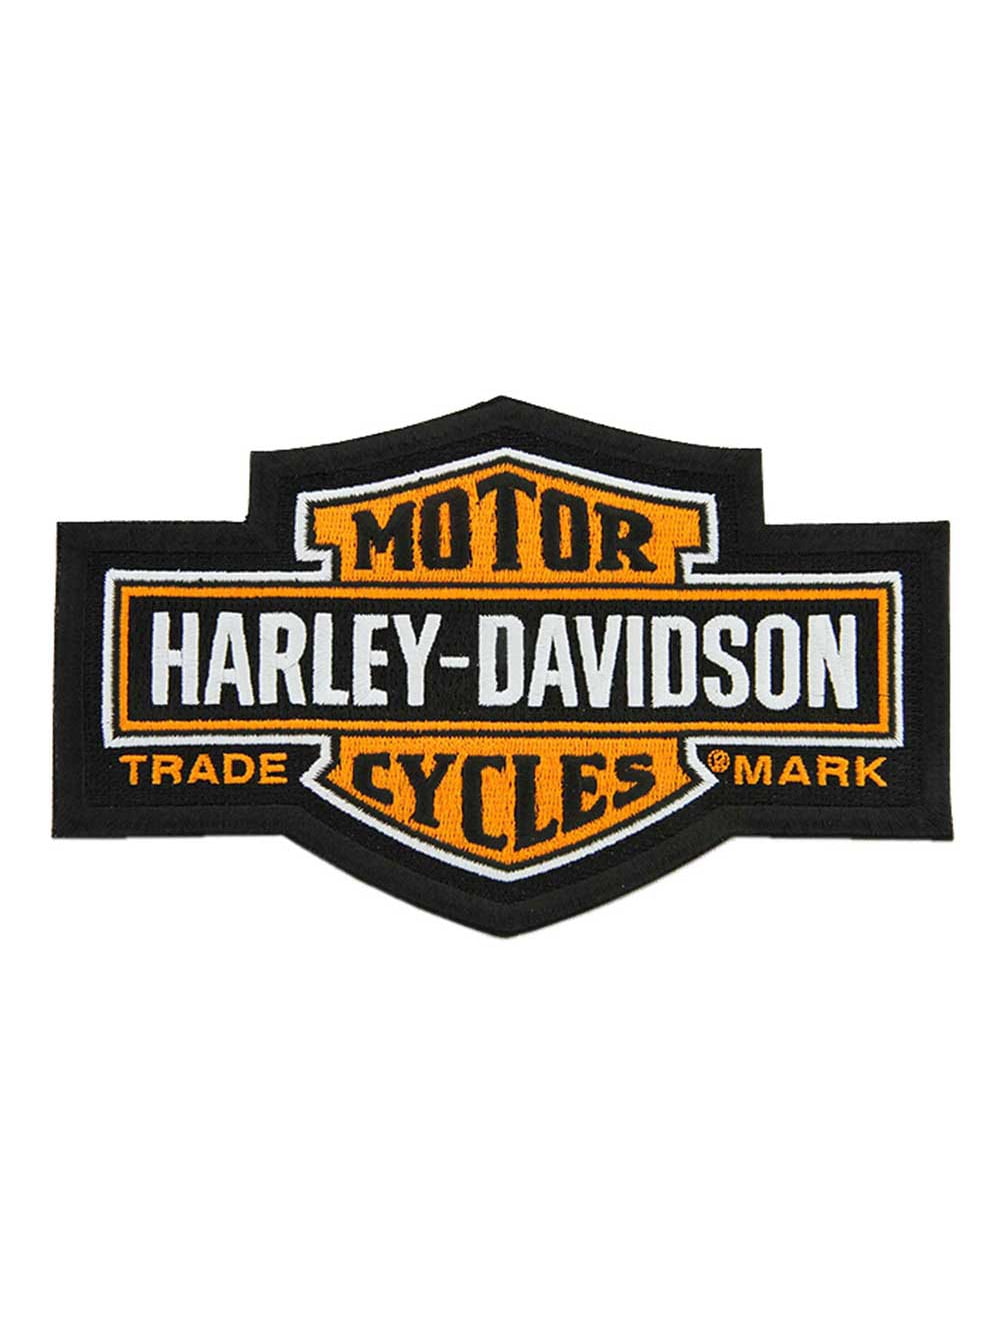 Harley Davidson motorcycle strip machine embroidered iron/ sew on logo/patch 